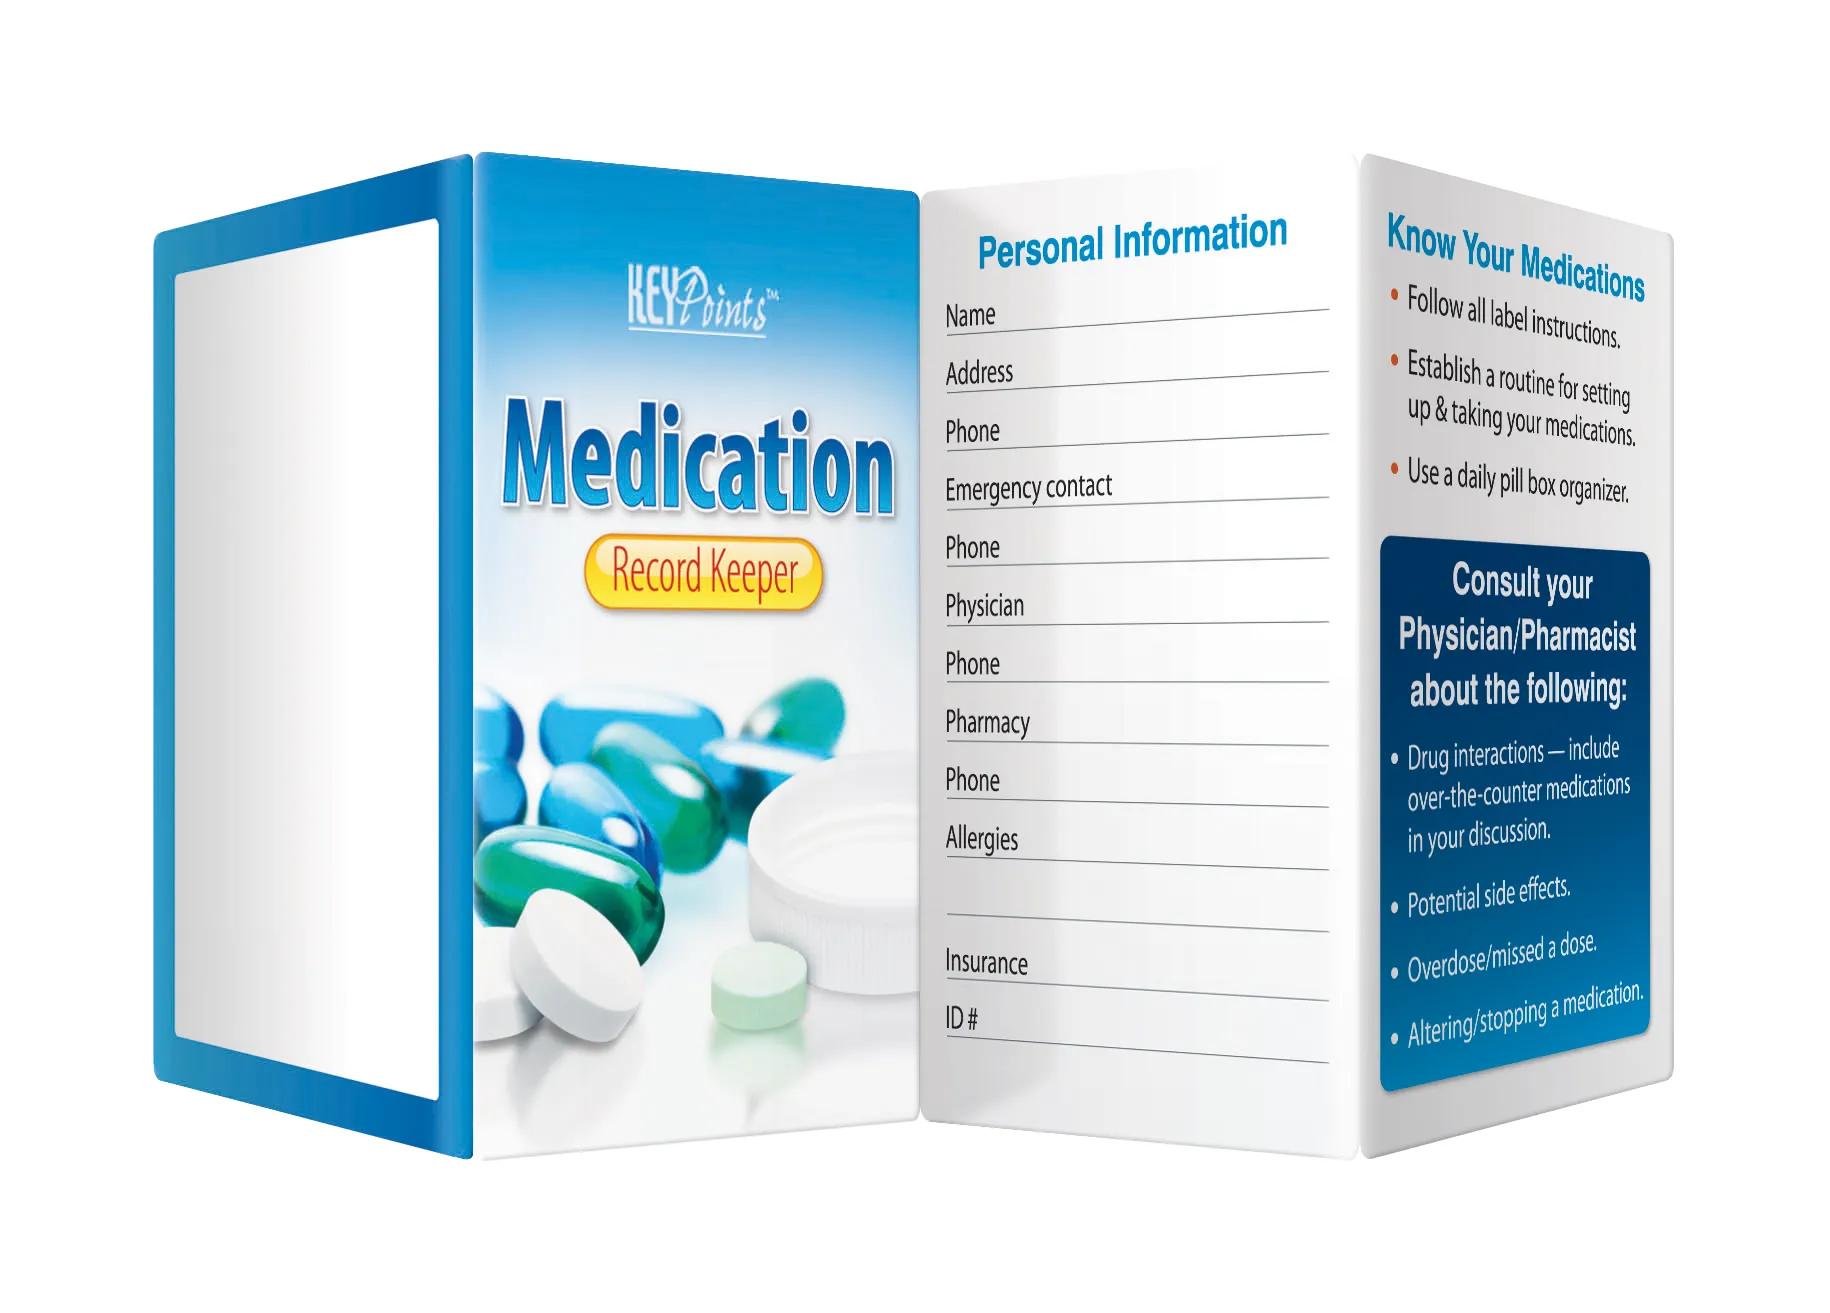 Key Point: Medication Record Keeper 1 of 3